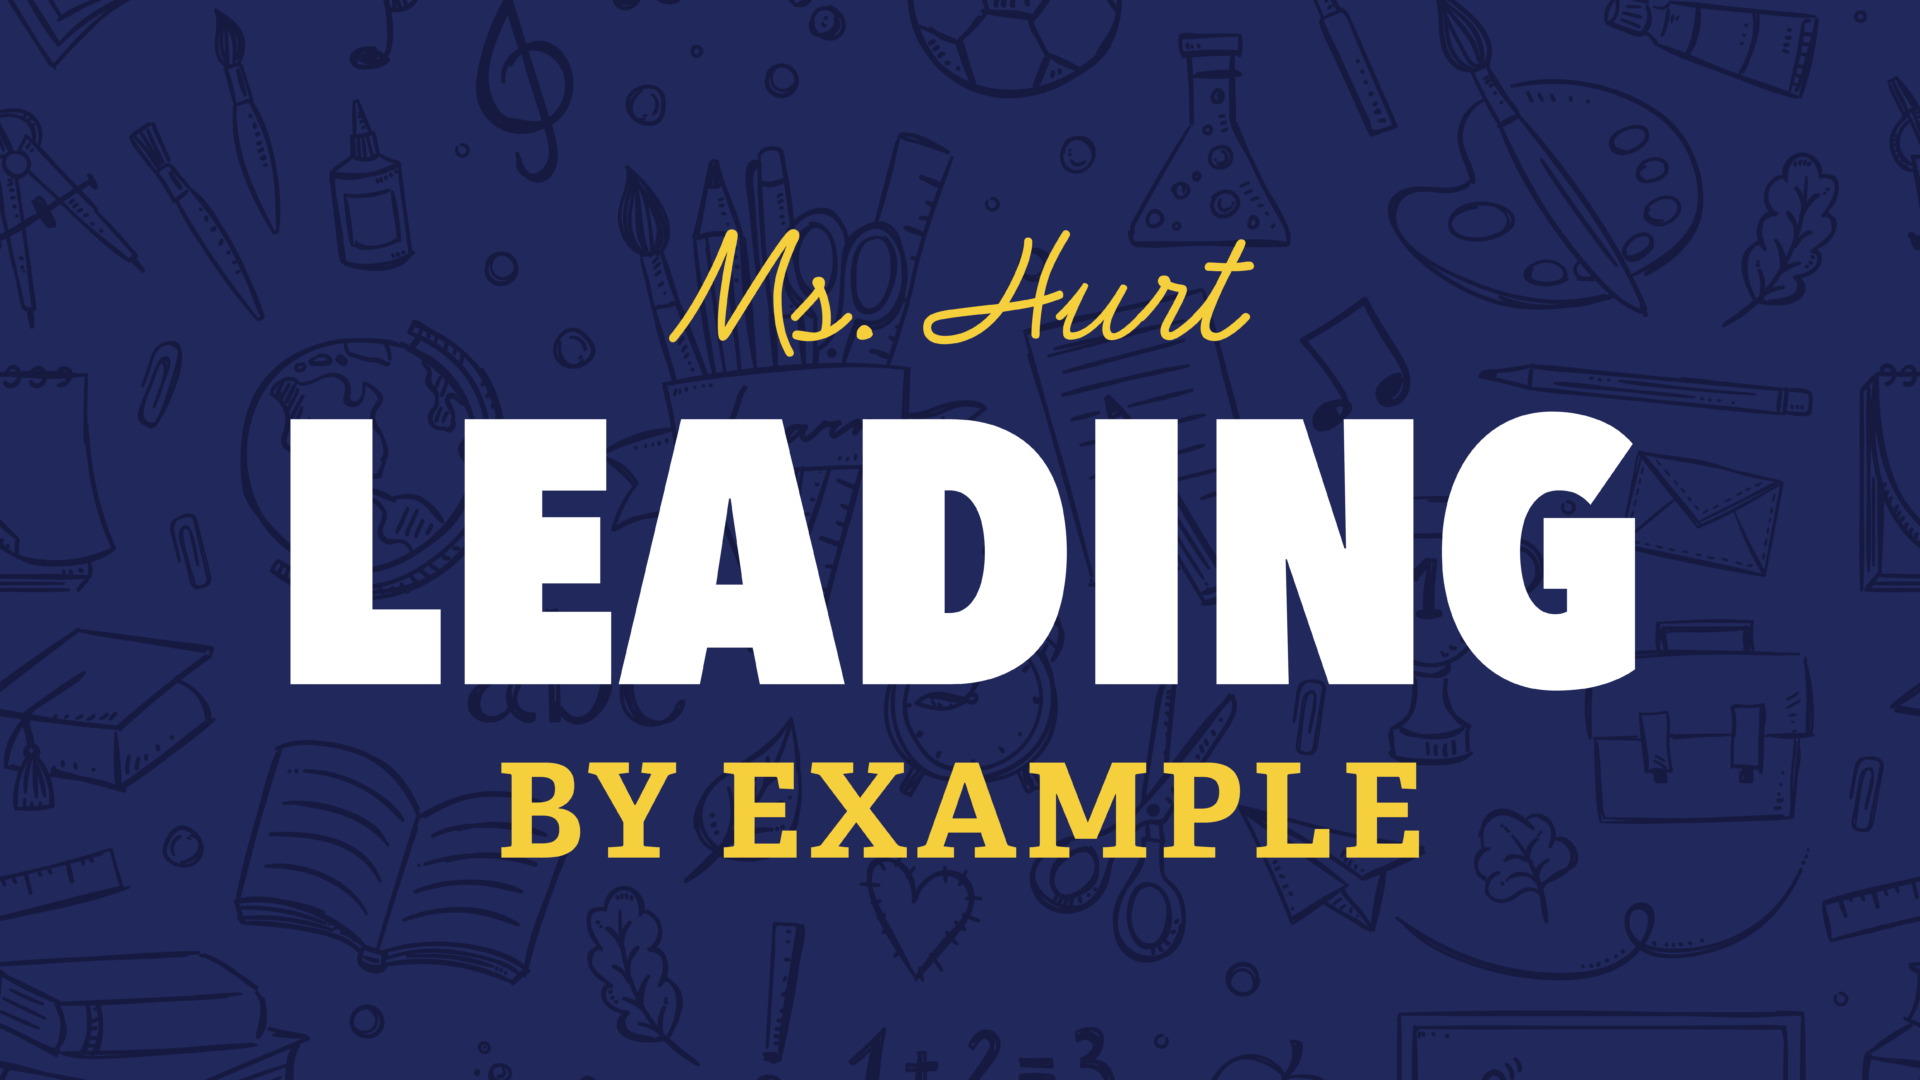 Decorative Image for Bradford Academy describing Ms. Hunt's leading by example program